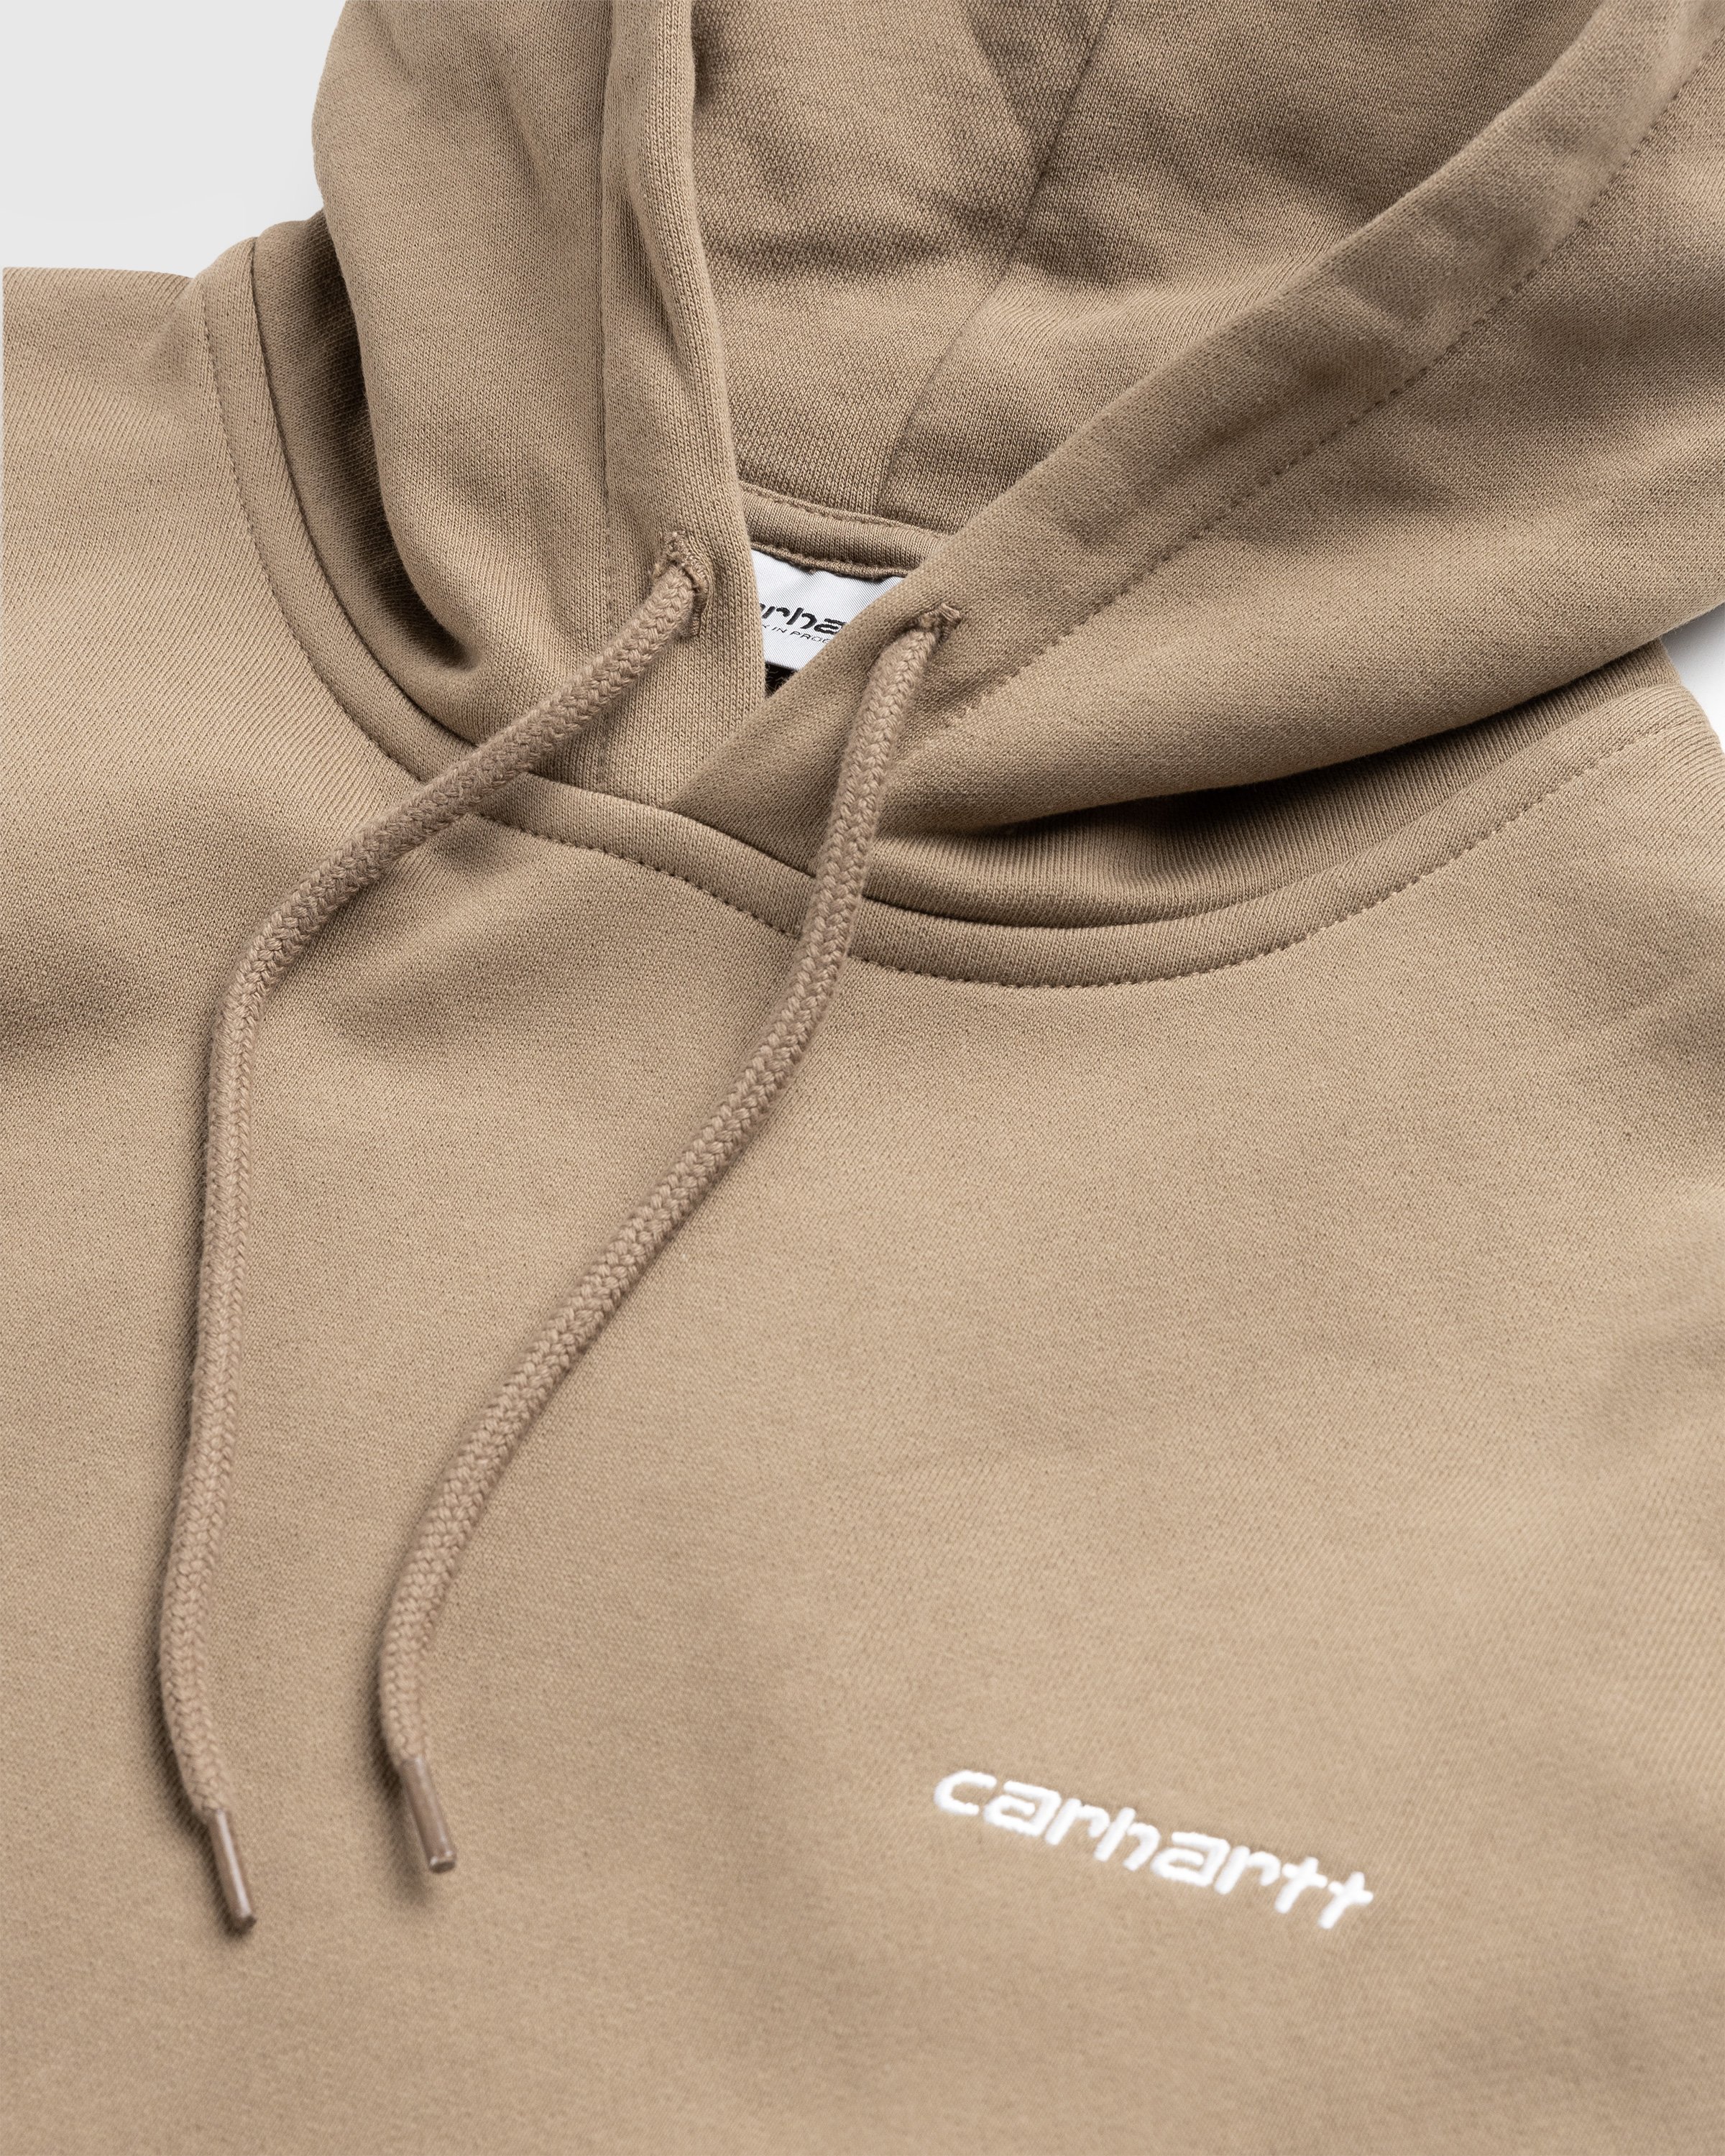 Carhartt WIP - Script Embroidery Hoodie Buffalo/White - Clothing - Green - Image 5